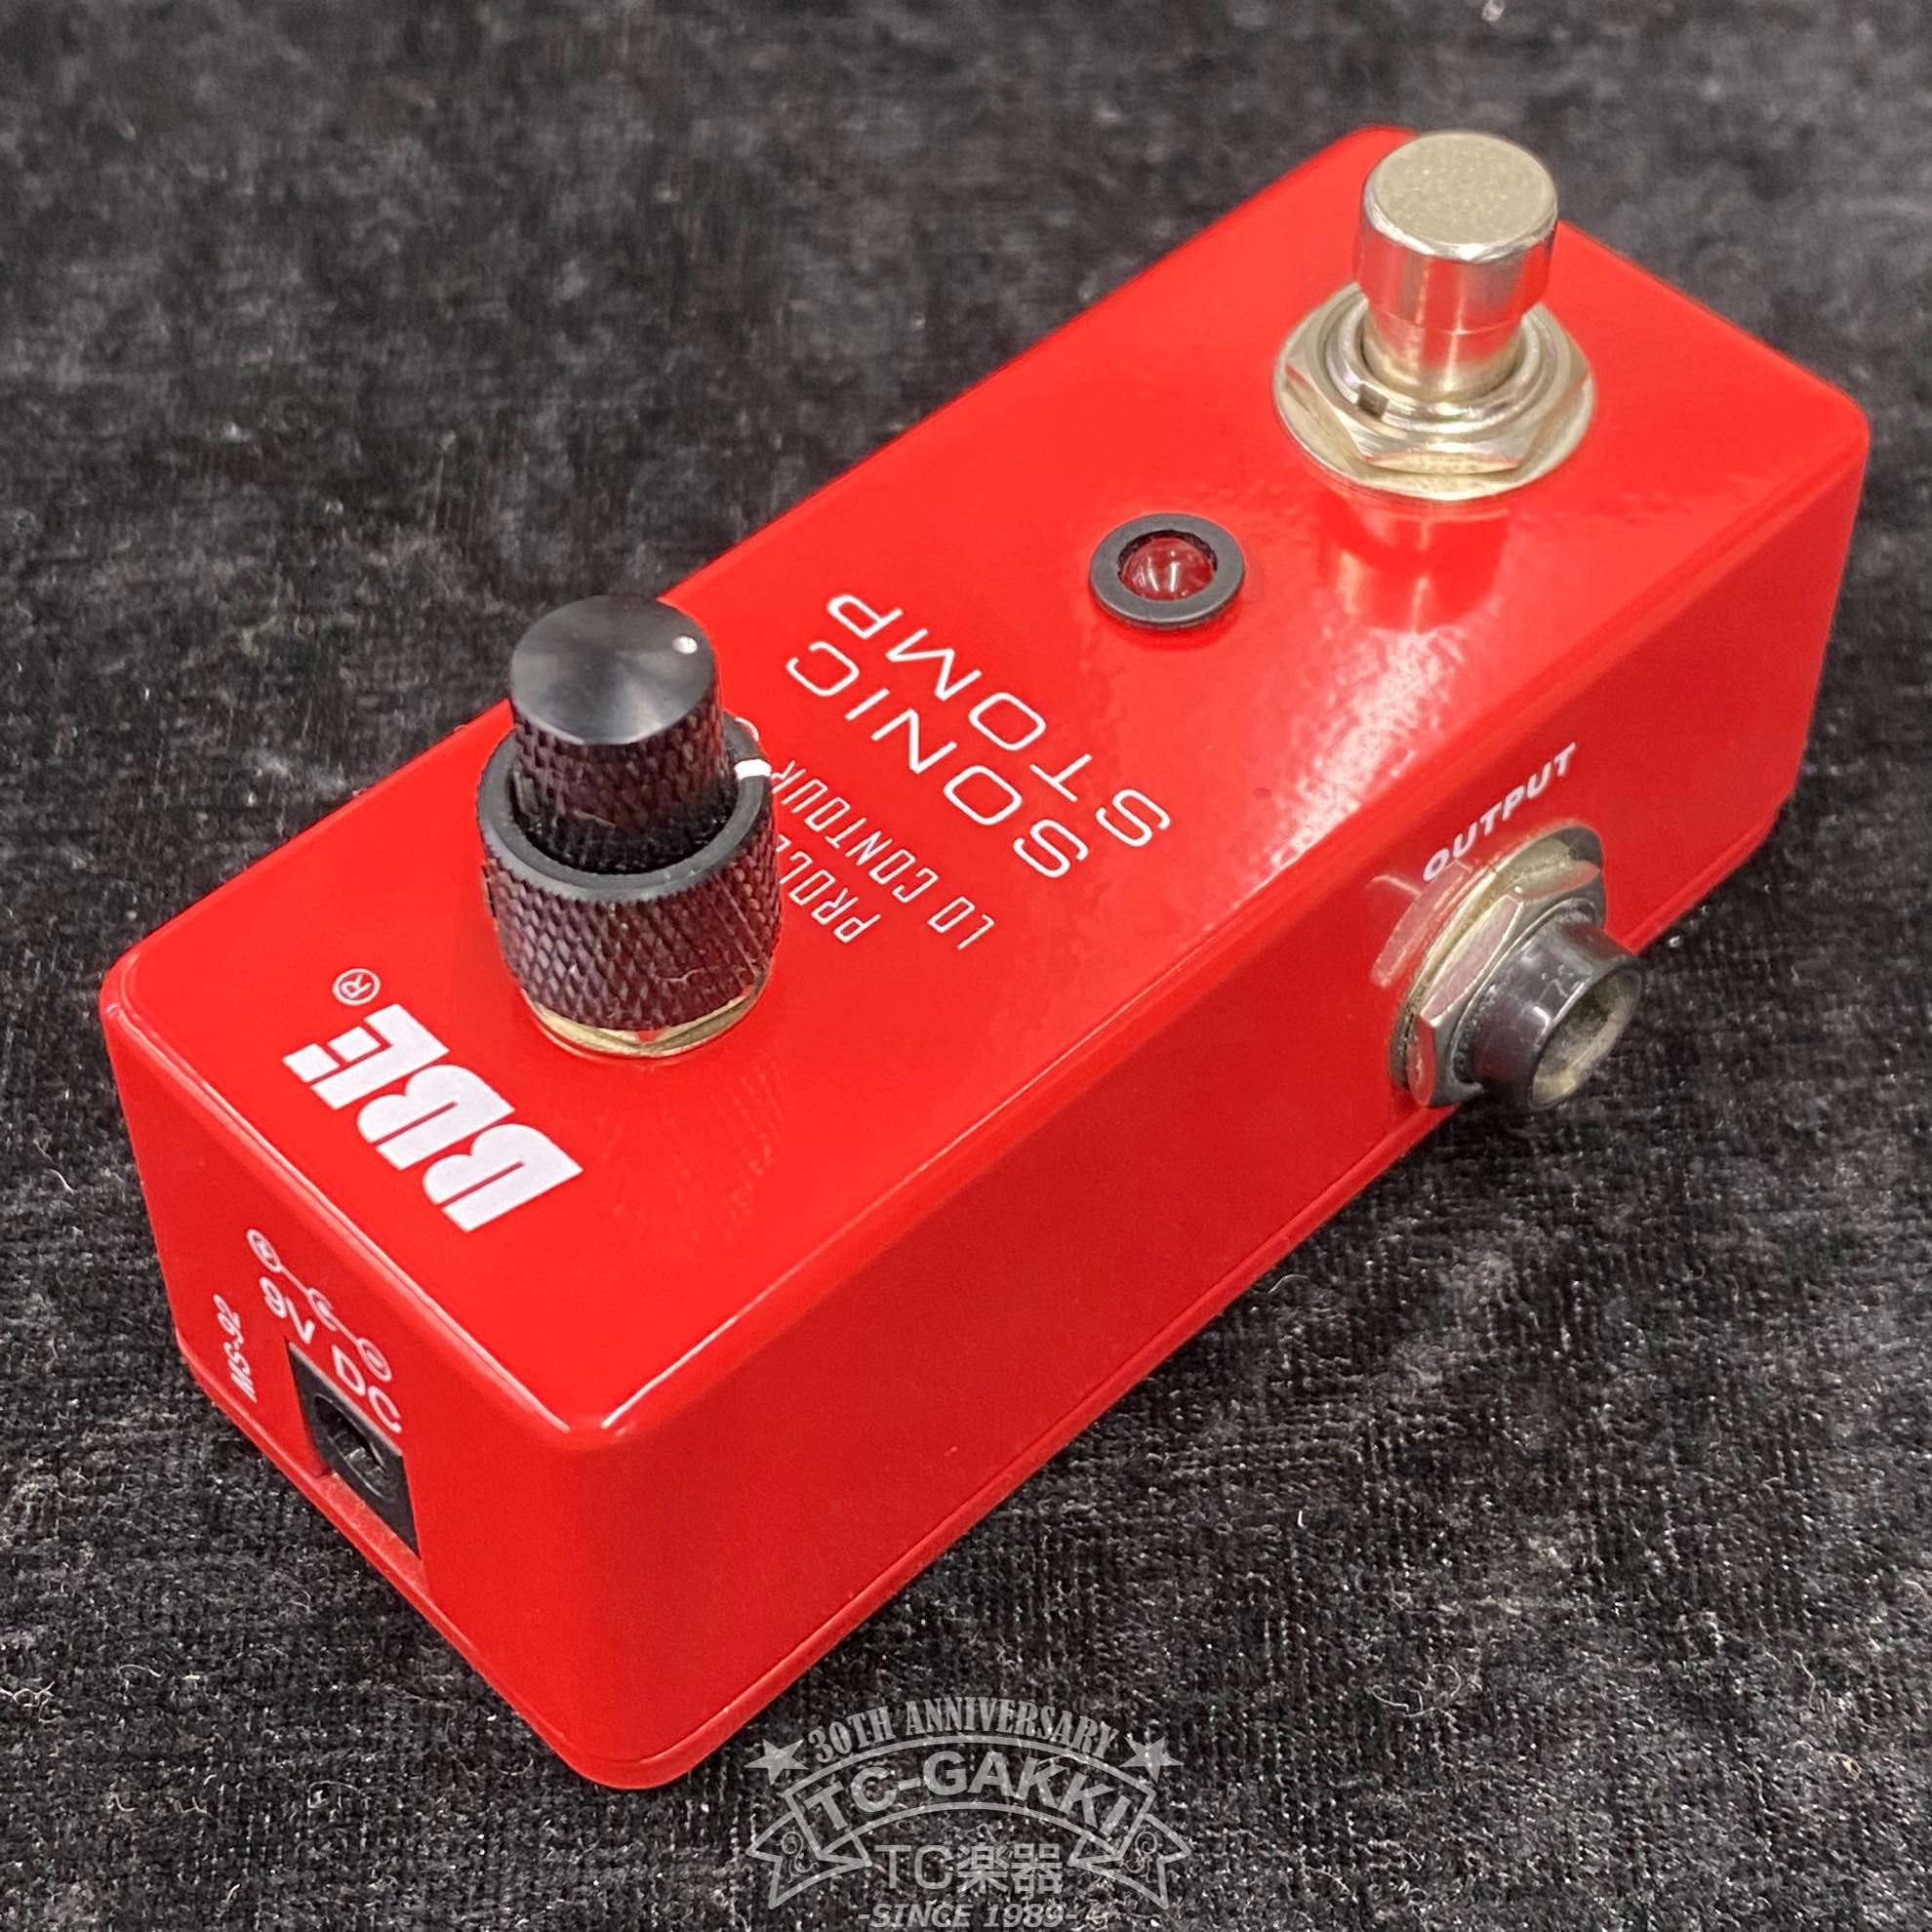 Bbe SONIC STOMP MS 92 SONIC MAXIMIZER 2010 0 Effect For Sale TCGAKKI